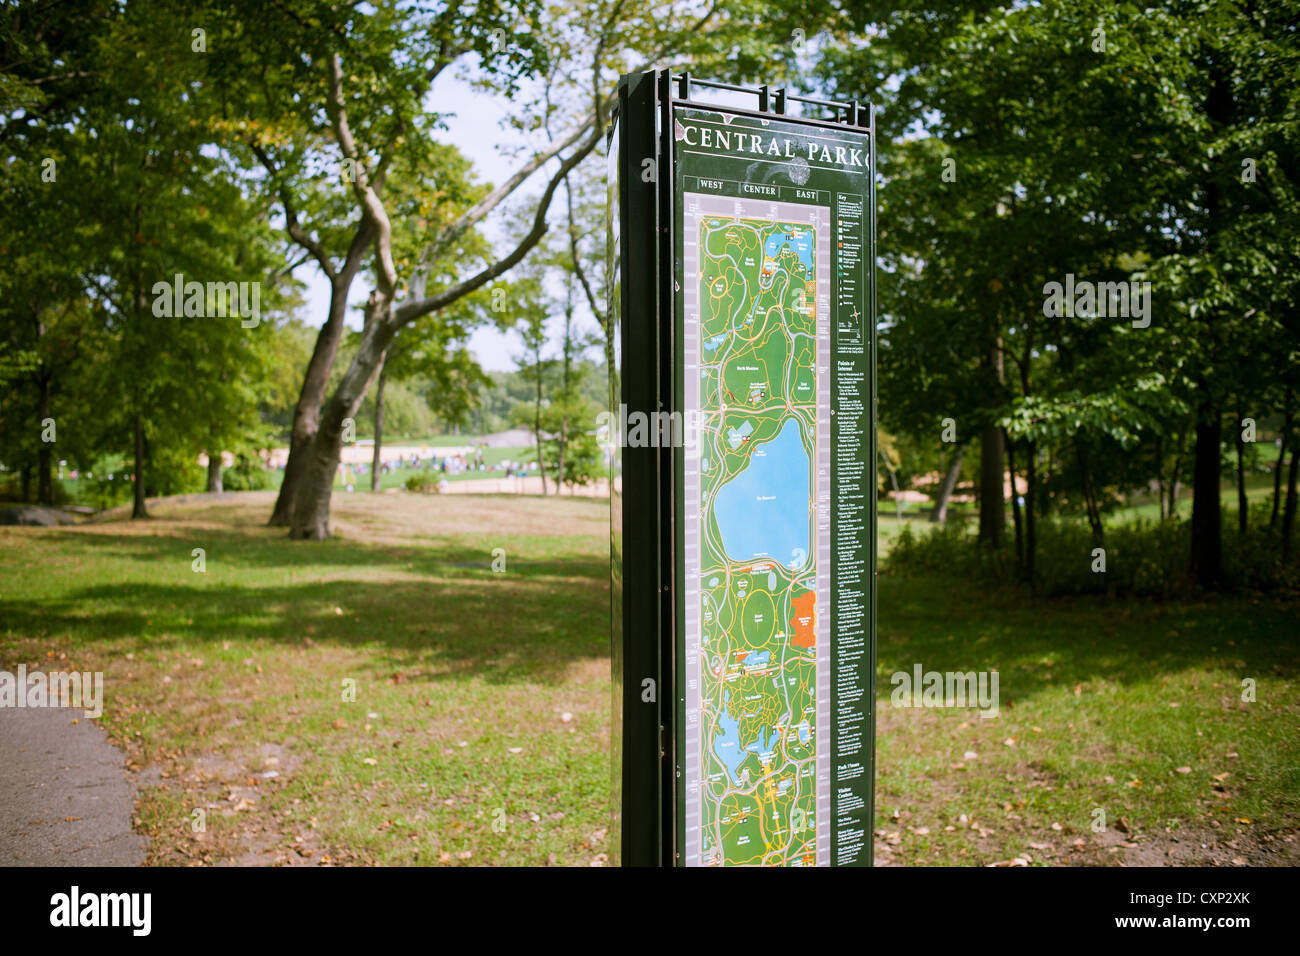 A map and wayfinding sign is seen in Central Park in New York on Saturday, October 6, 2012. (© Richard B. Levine) Stock Photo